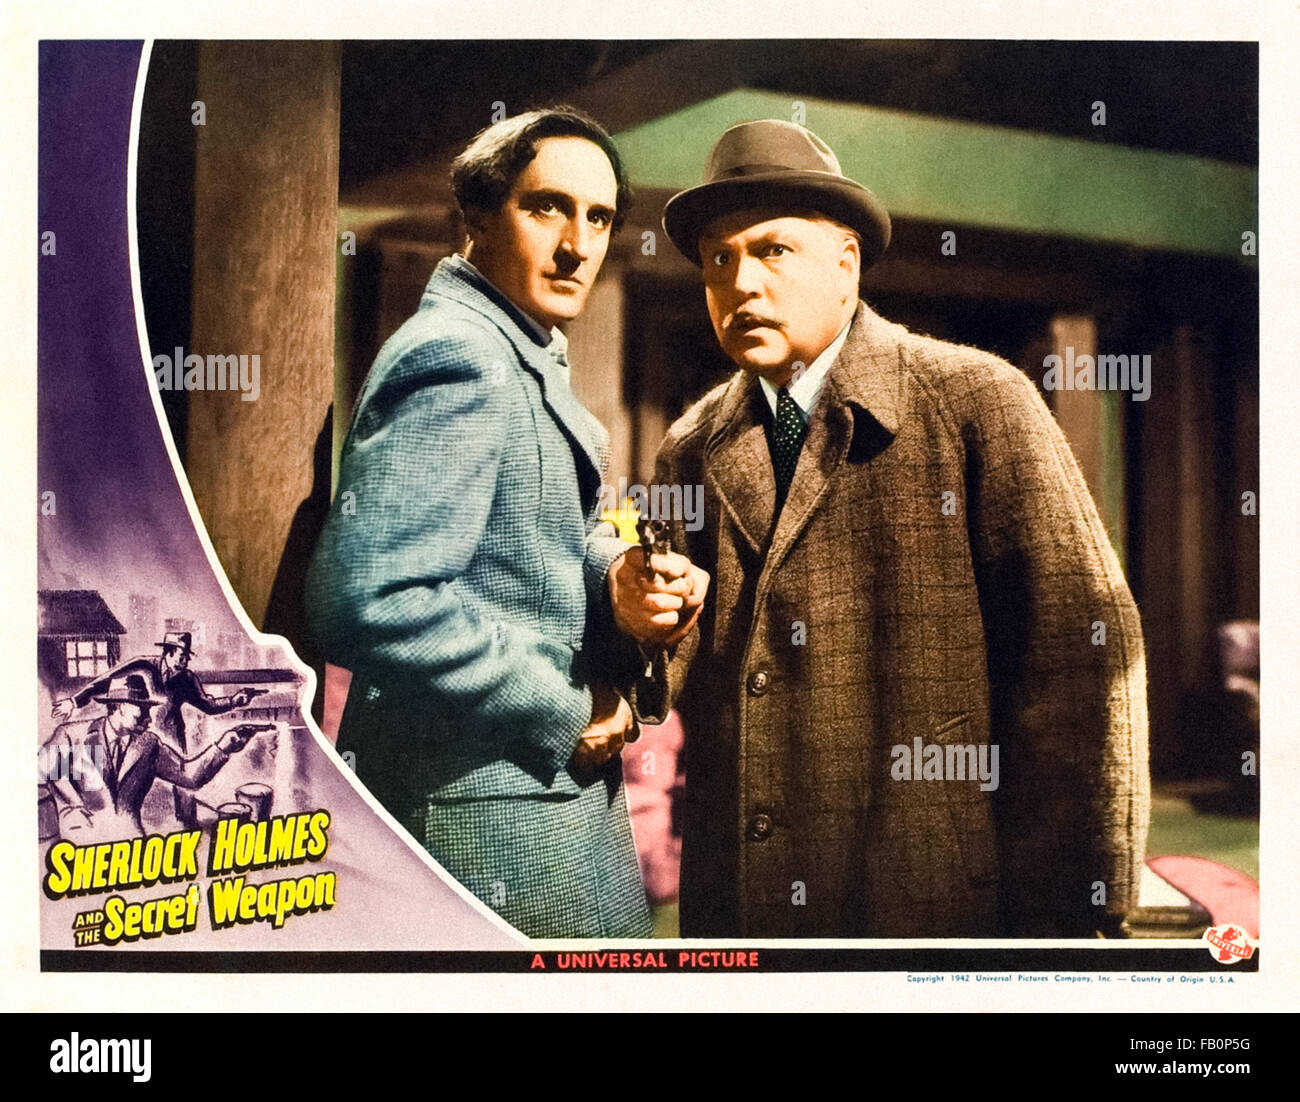 Lobby card for 'Sherlock Holmes and the Secret Weapon' 1942 Sherlock Holmes film directed by Roy William Neill and starring Basil Rathbone (Holmes) and Nigel Bruce (Watson). Stock Photo